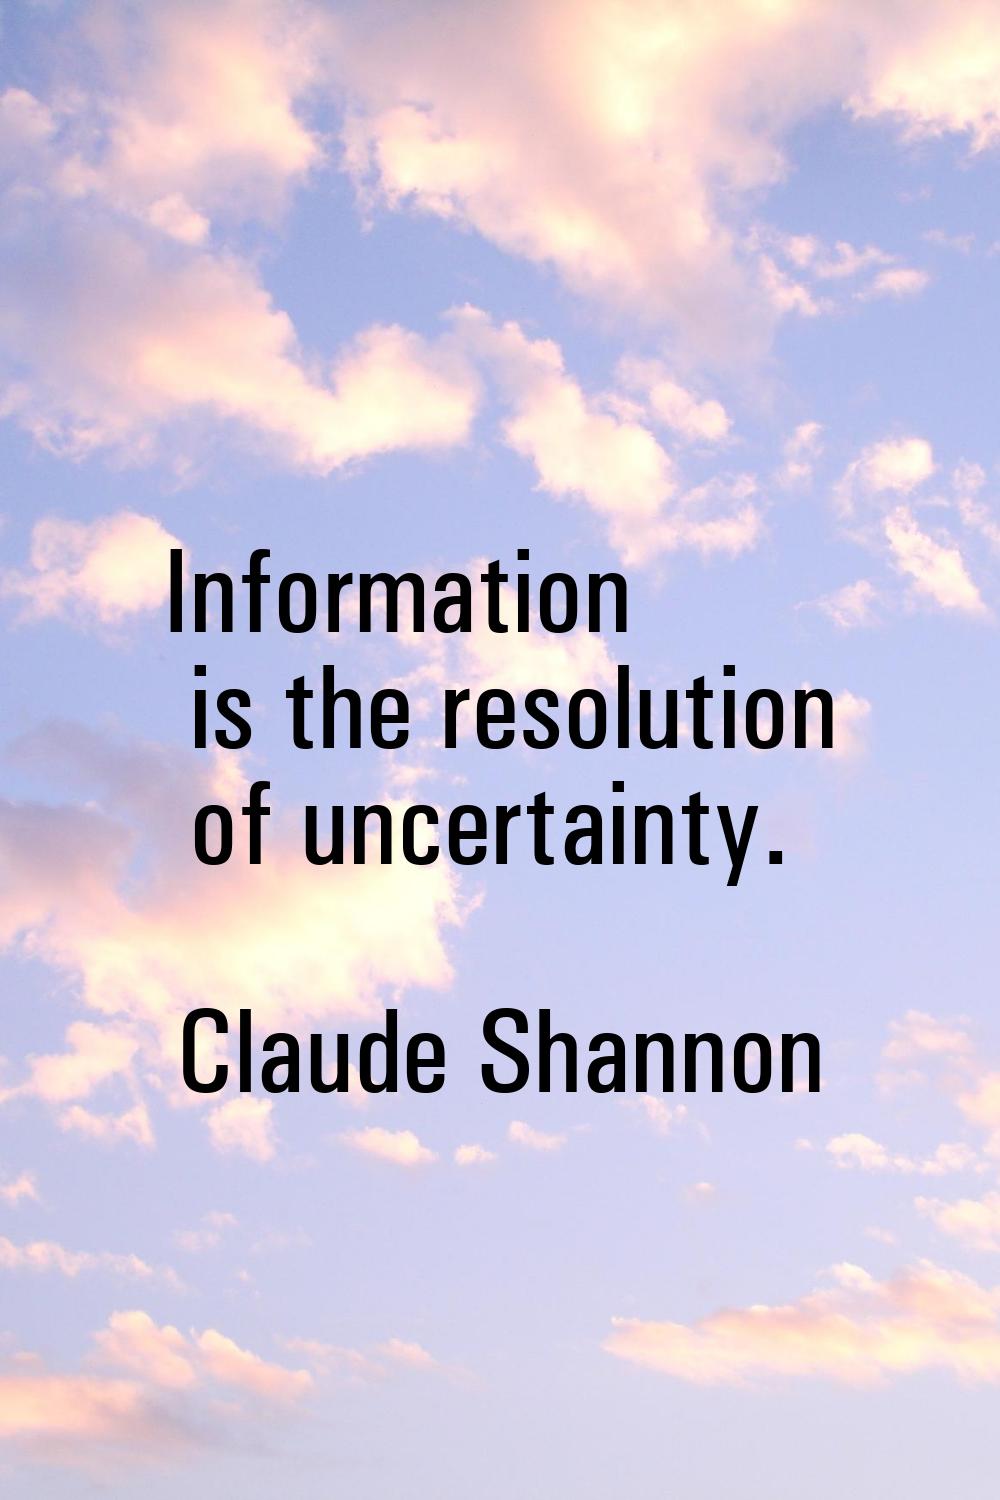 Information is the resolution of uncertainty.